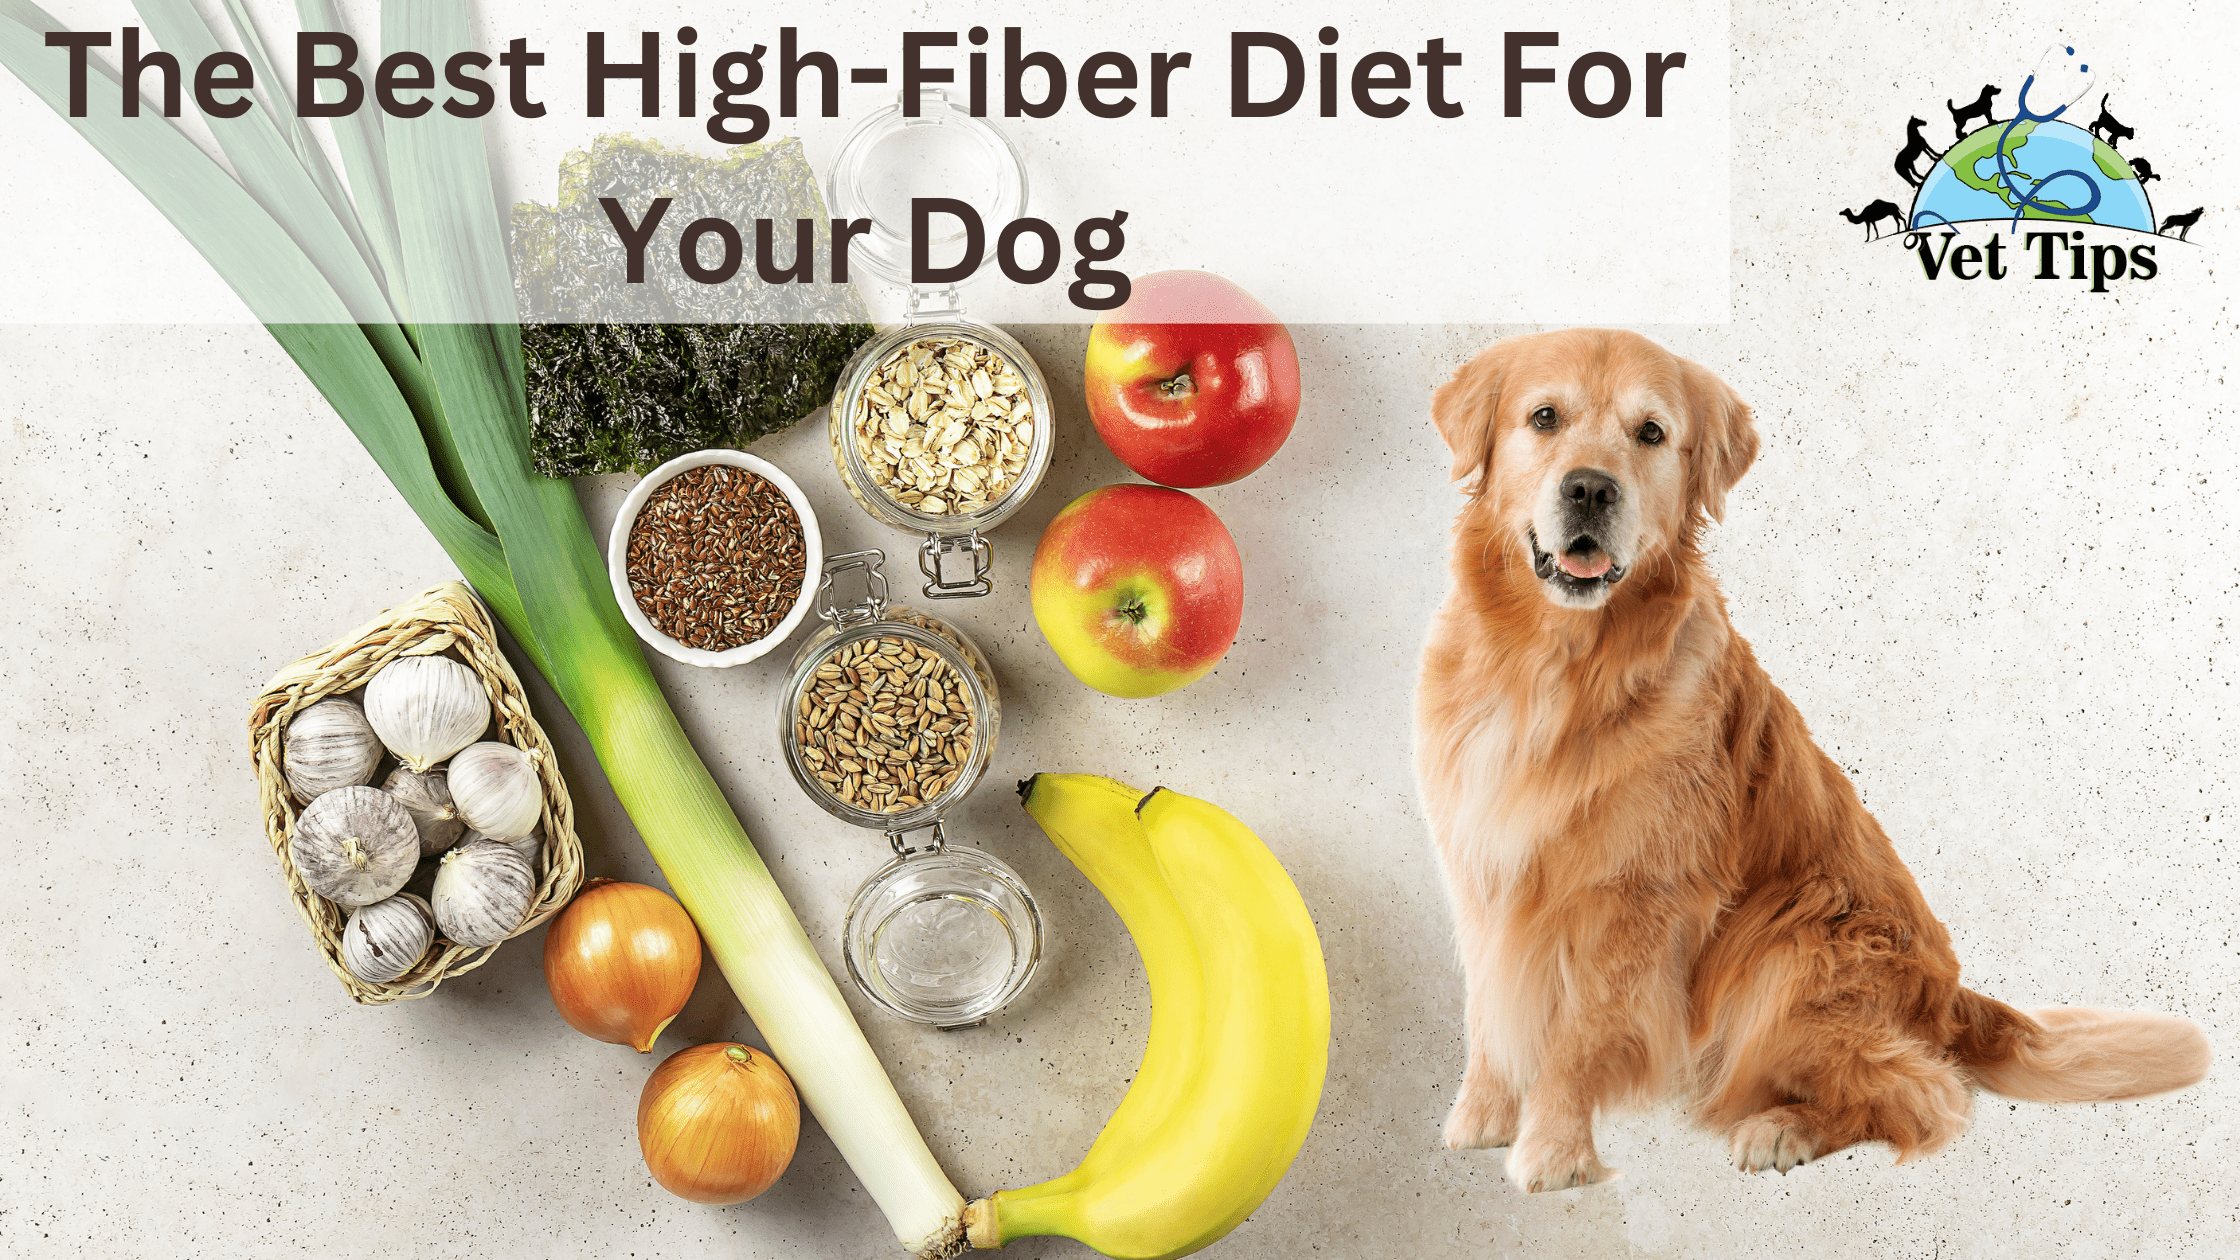 The Best High-Fiber Diet For Your Dog